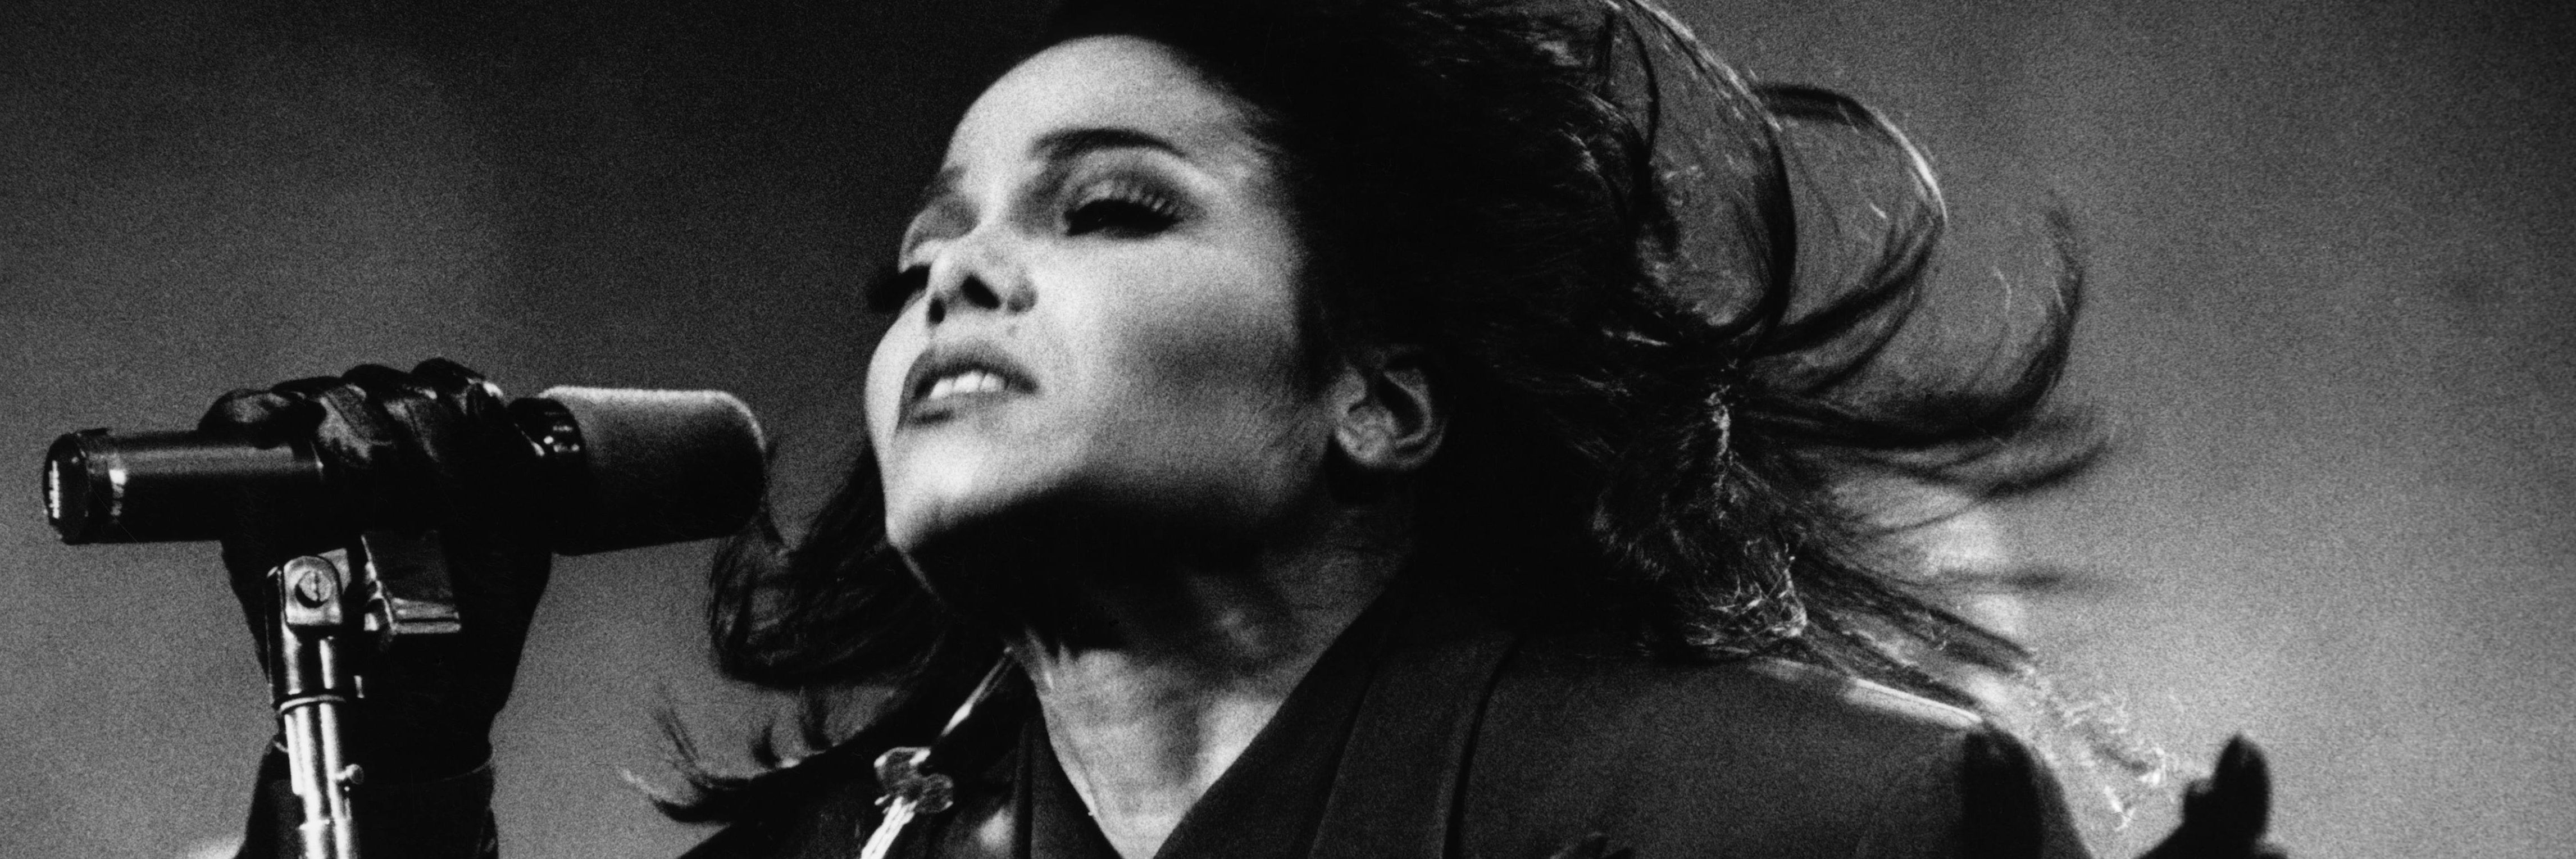 Thirty Years Later: Janet Jackson's 'Rhythm Nation' Album Is Still 'Alright'